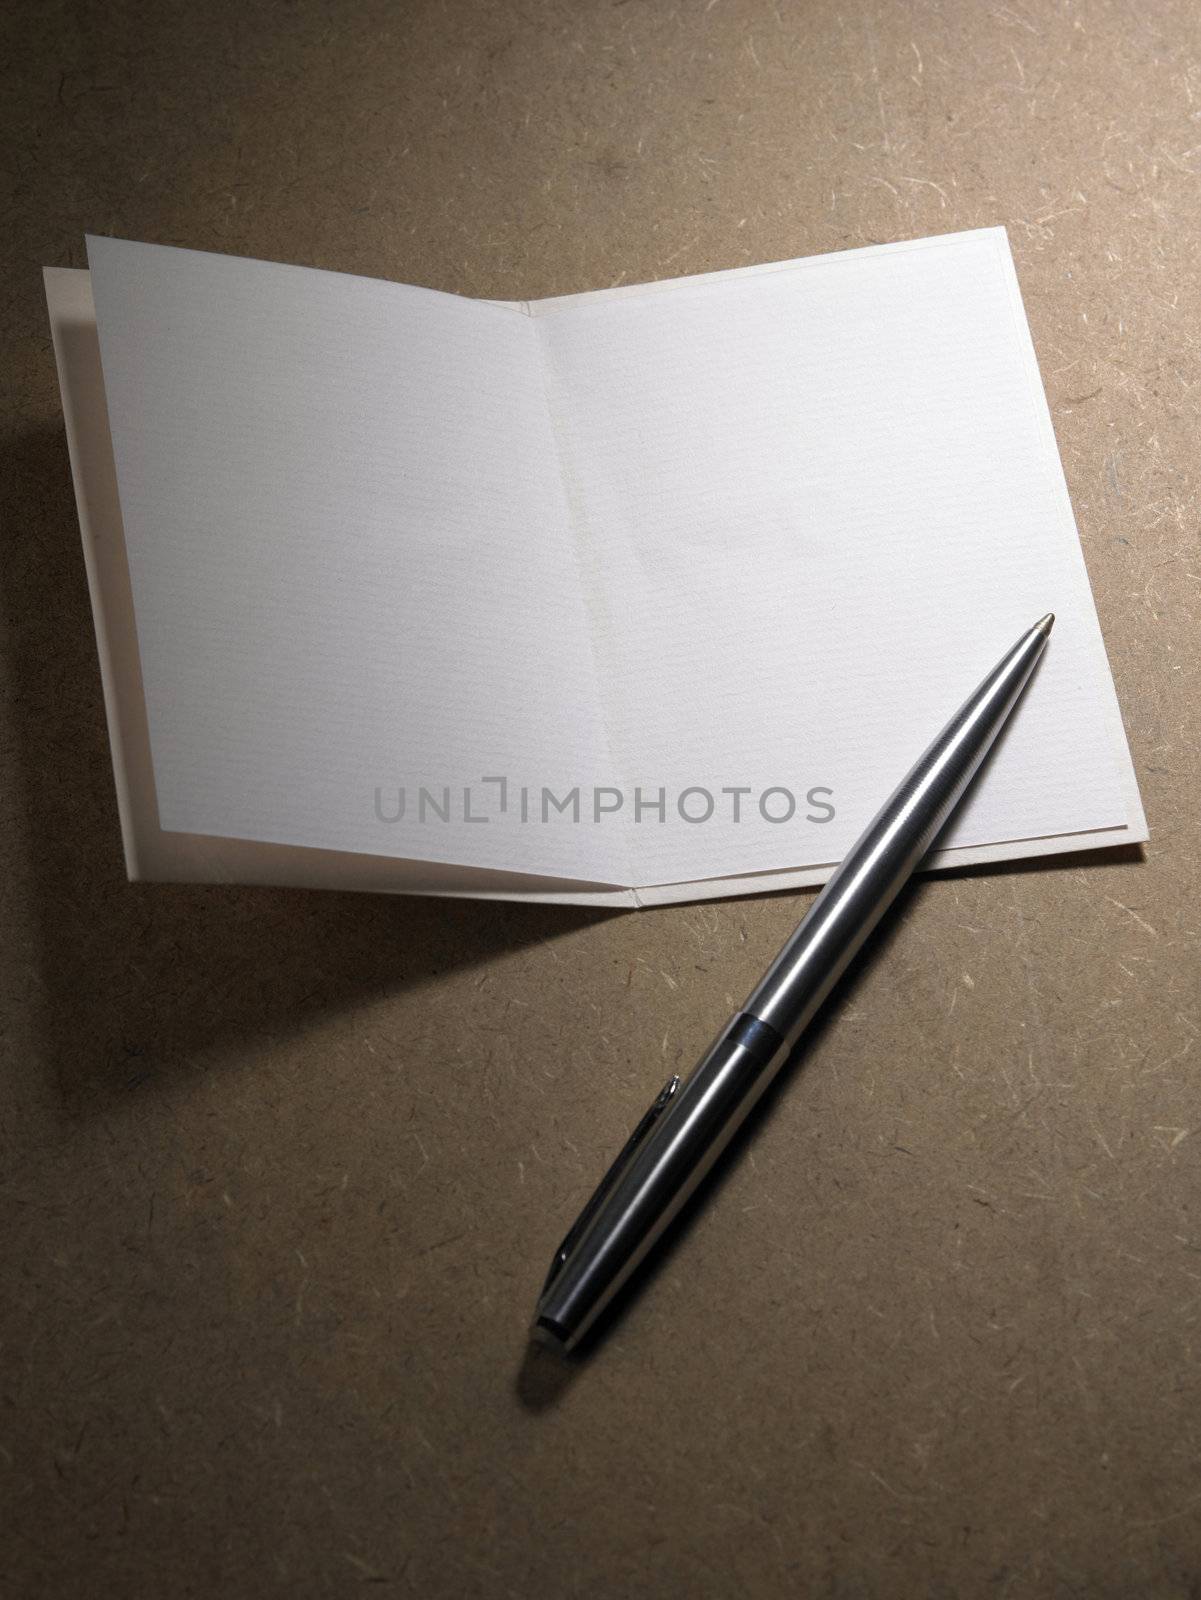 pen resting on a blank card